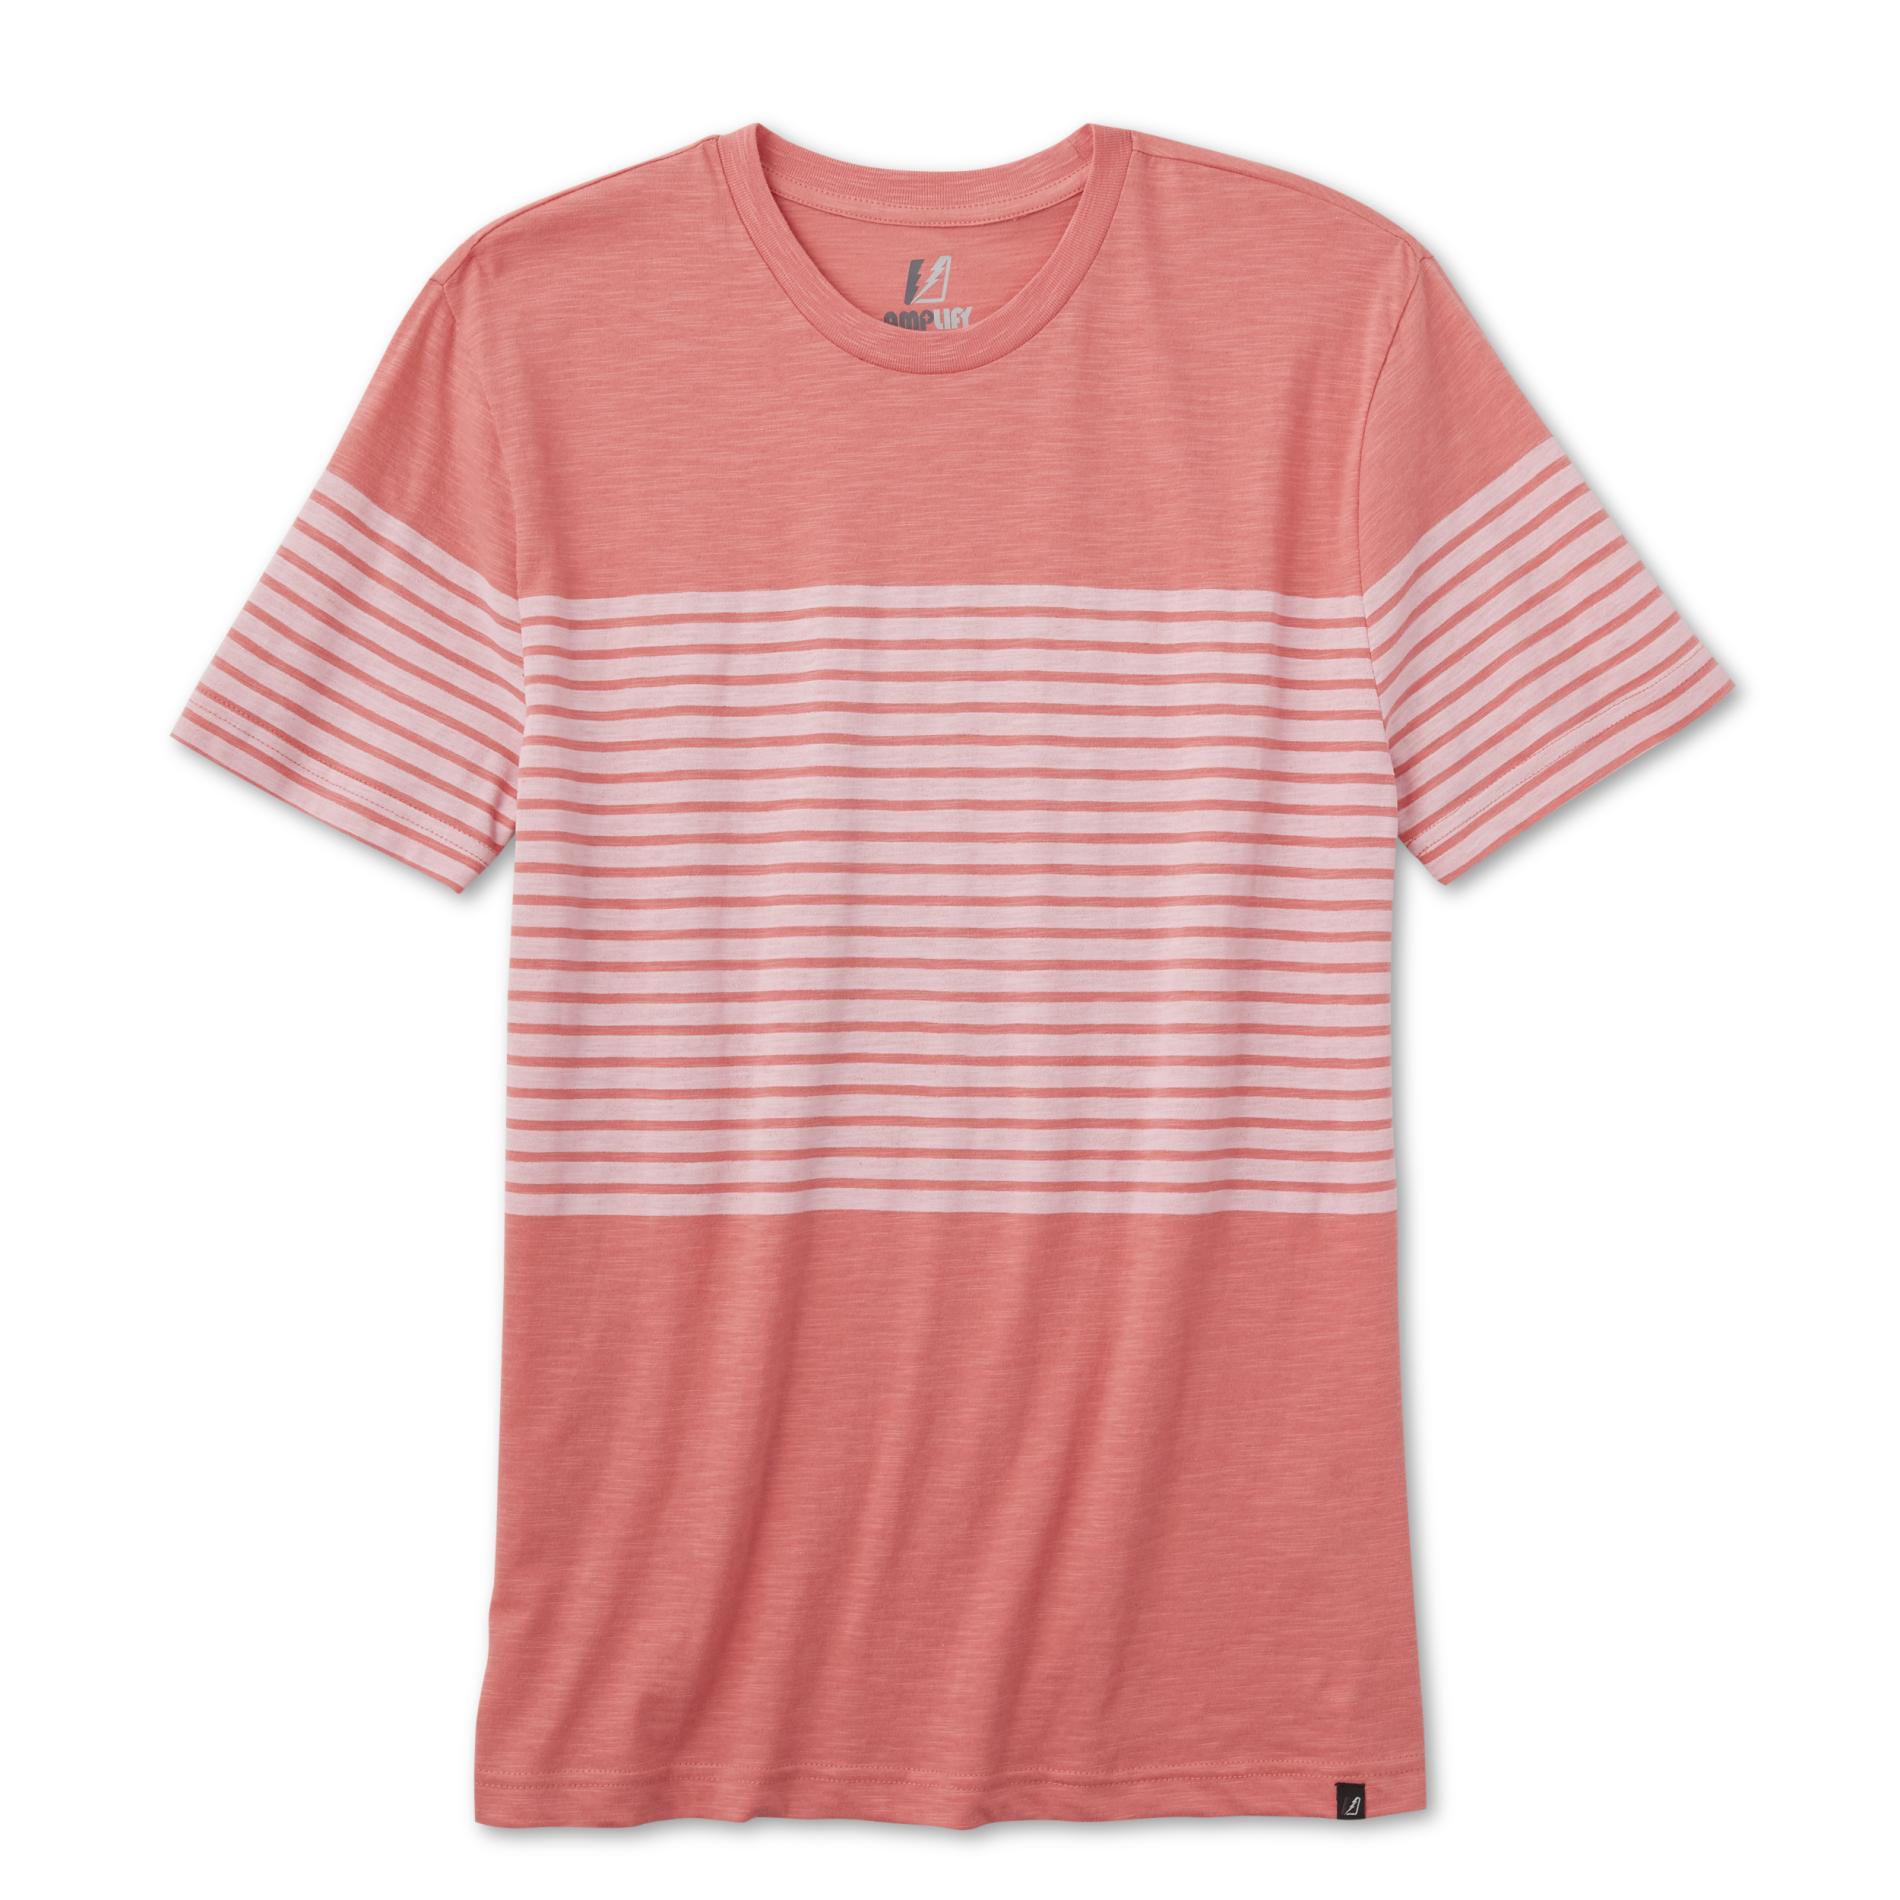 Amplify Young Men's T-Shirt - Striped